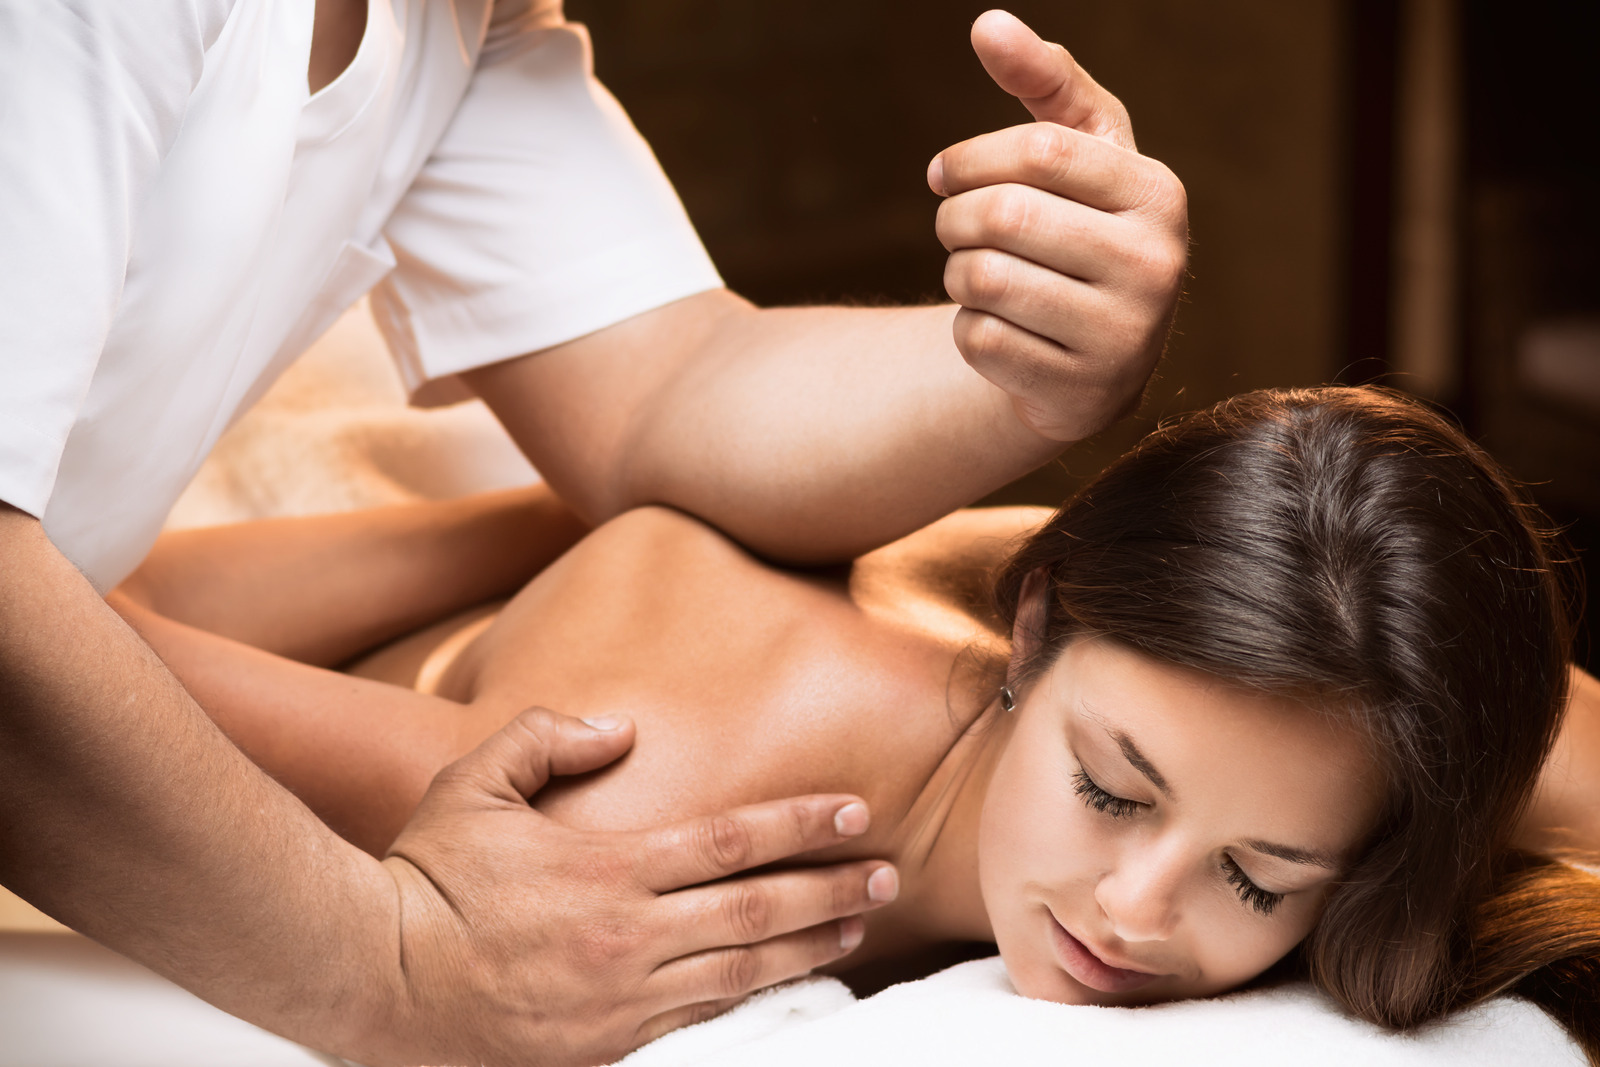 Botanica Day Spa - Clearwater, FL - Deep tissue massage IS different from f...